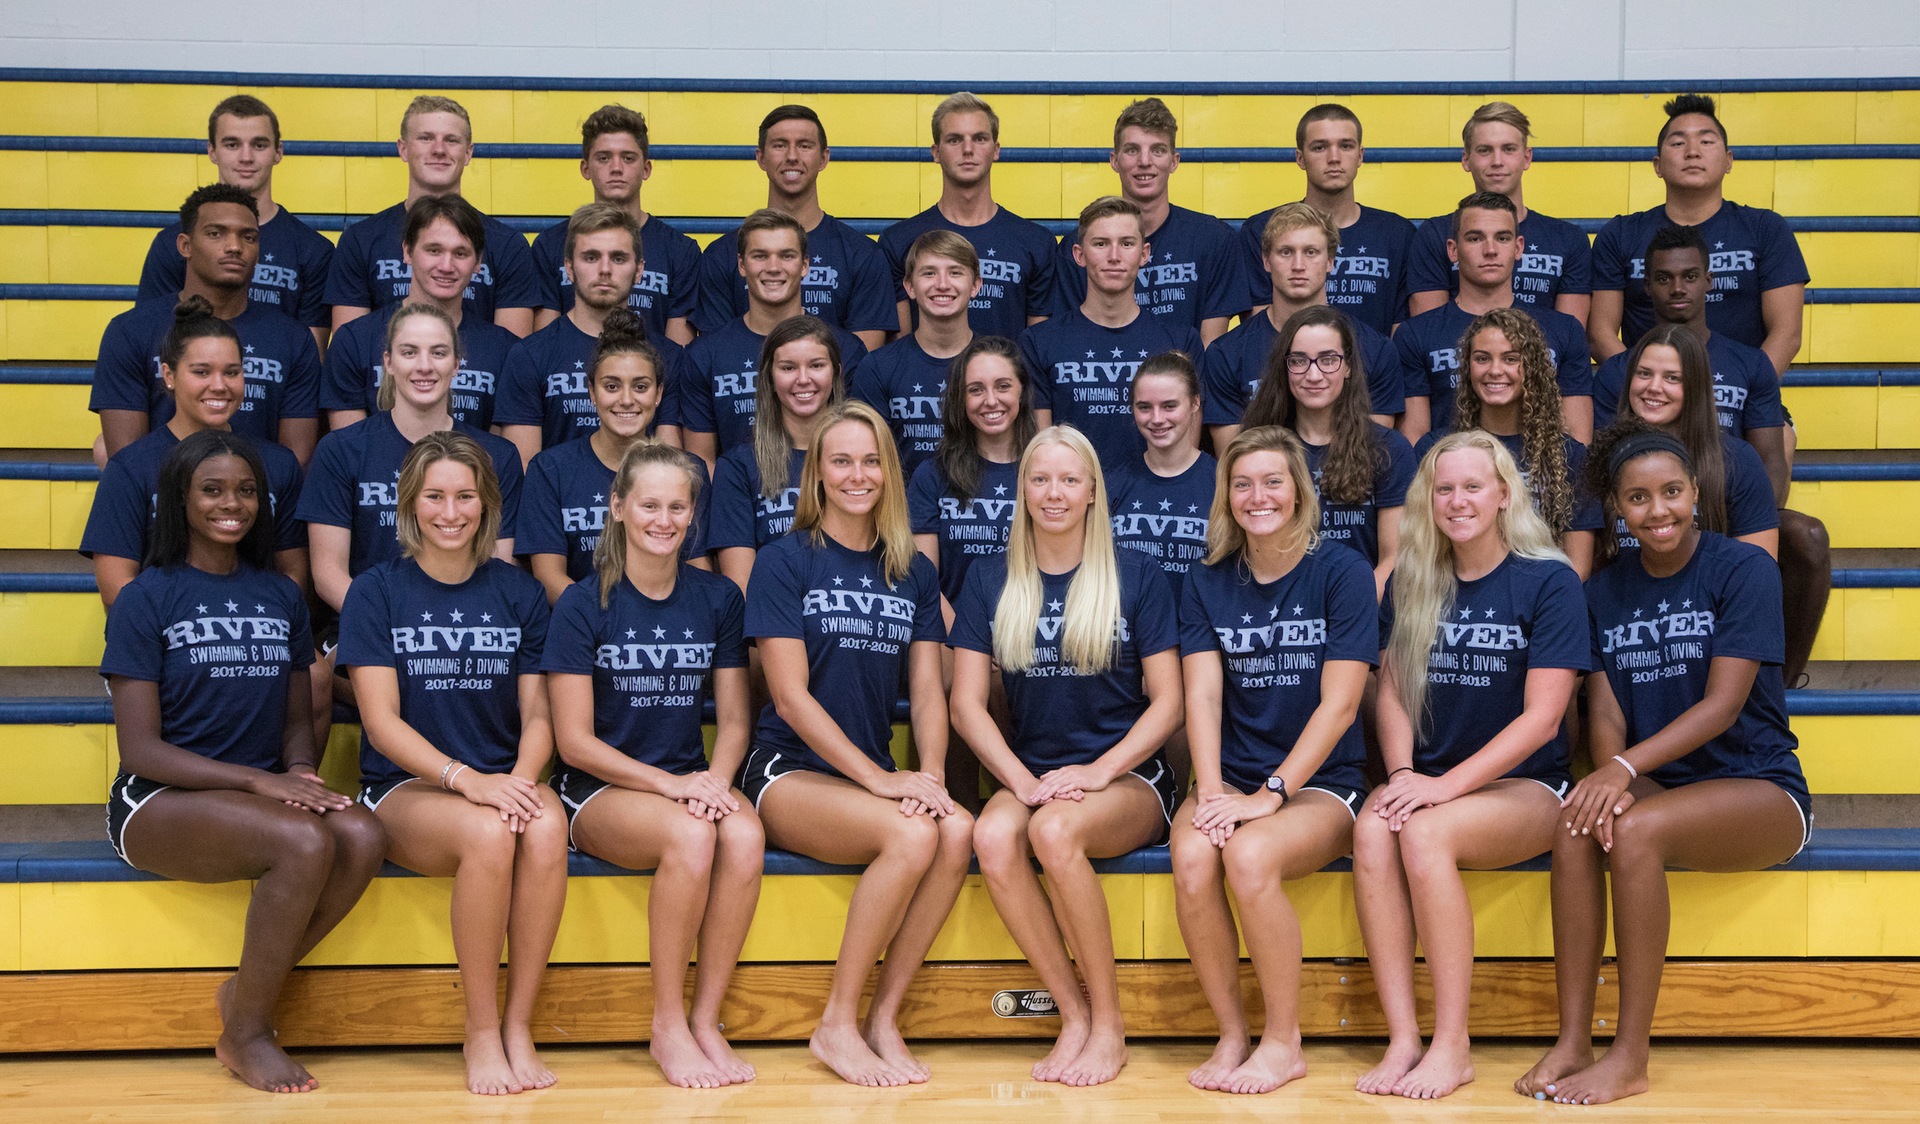 Indian River defeats Florida Southern College in last event to secure victory